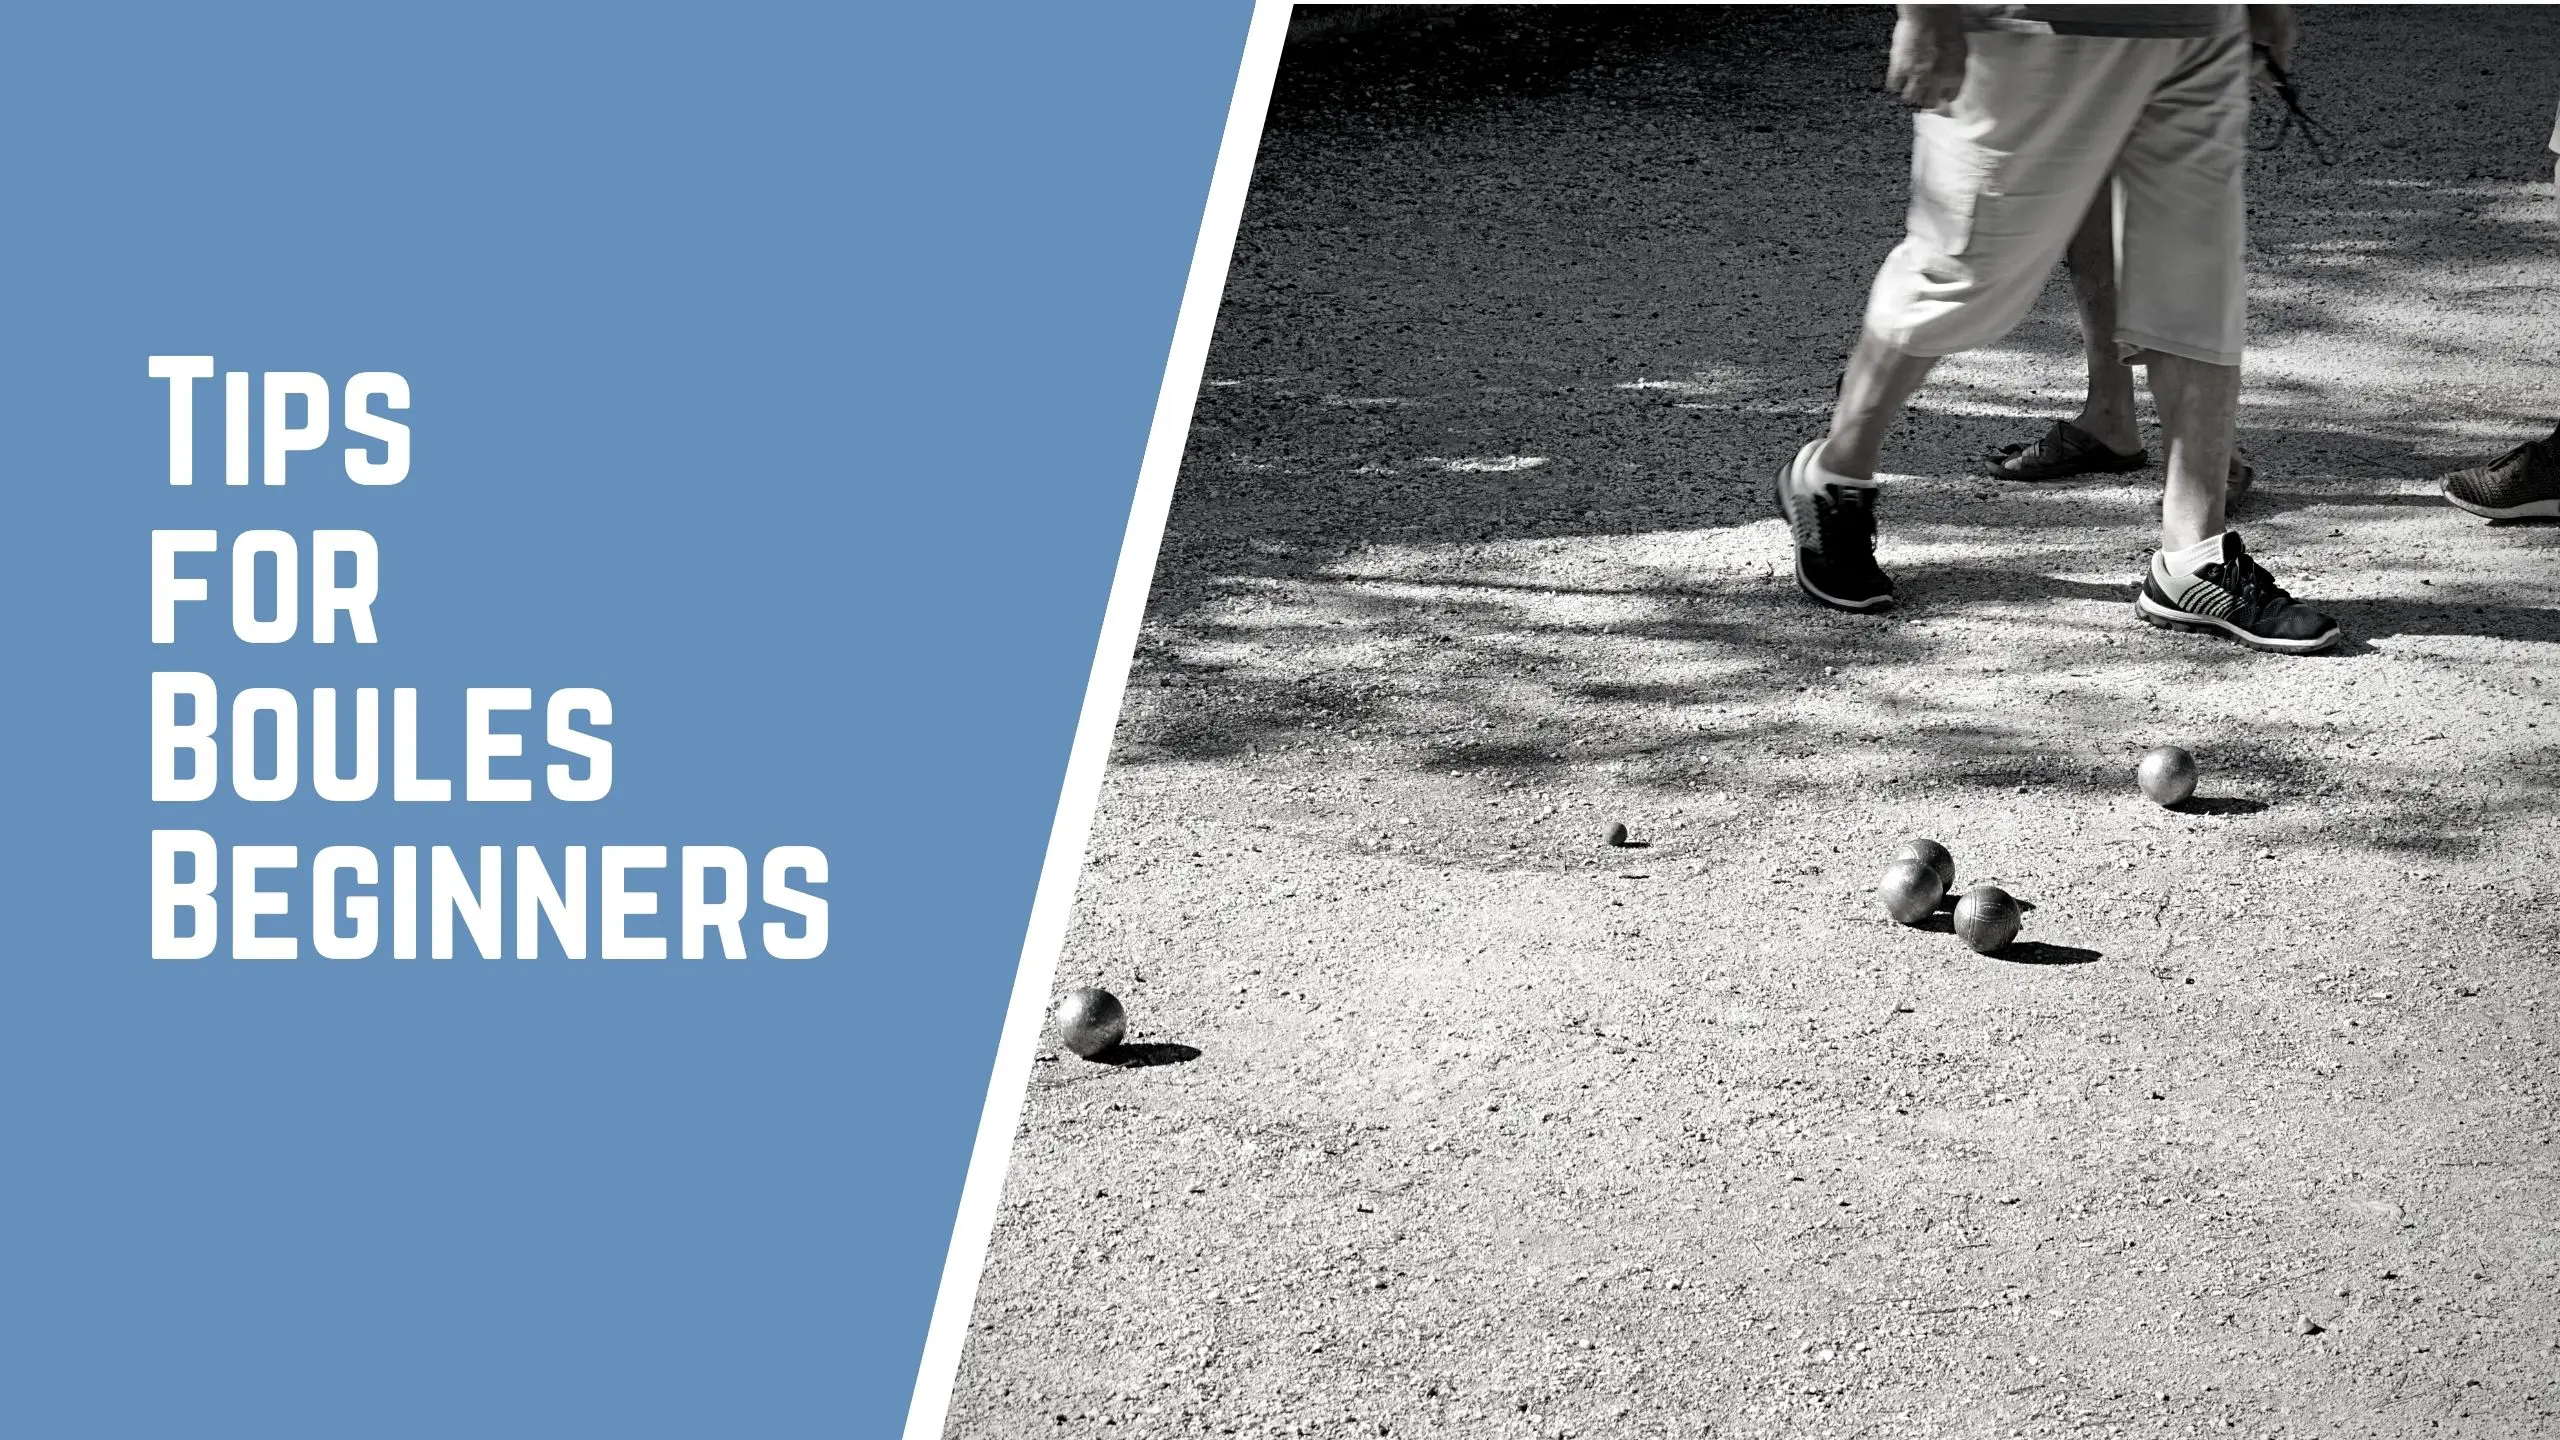 Tips for Boules Beginners